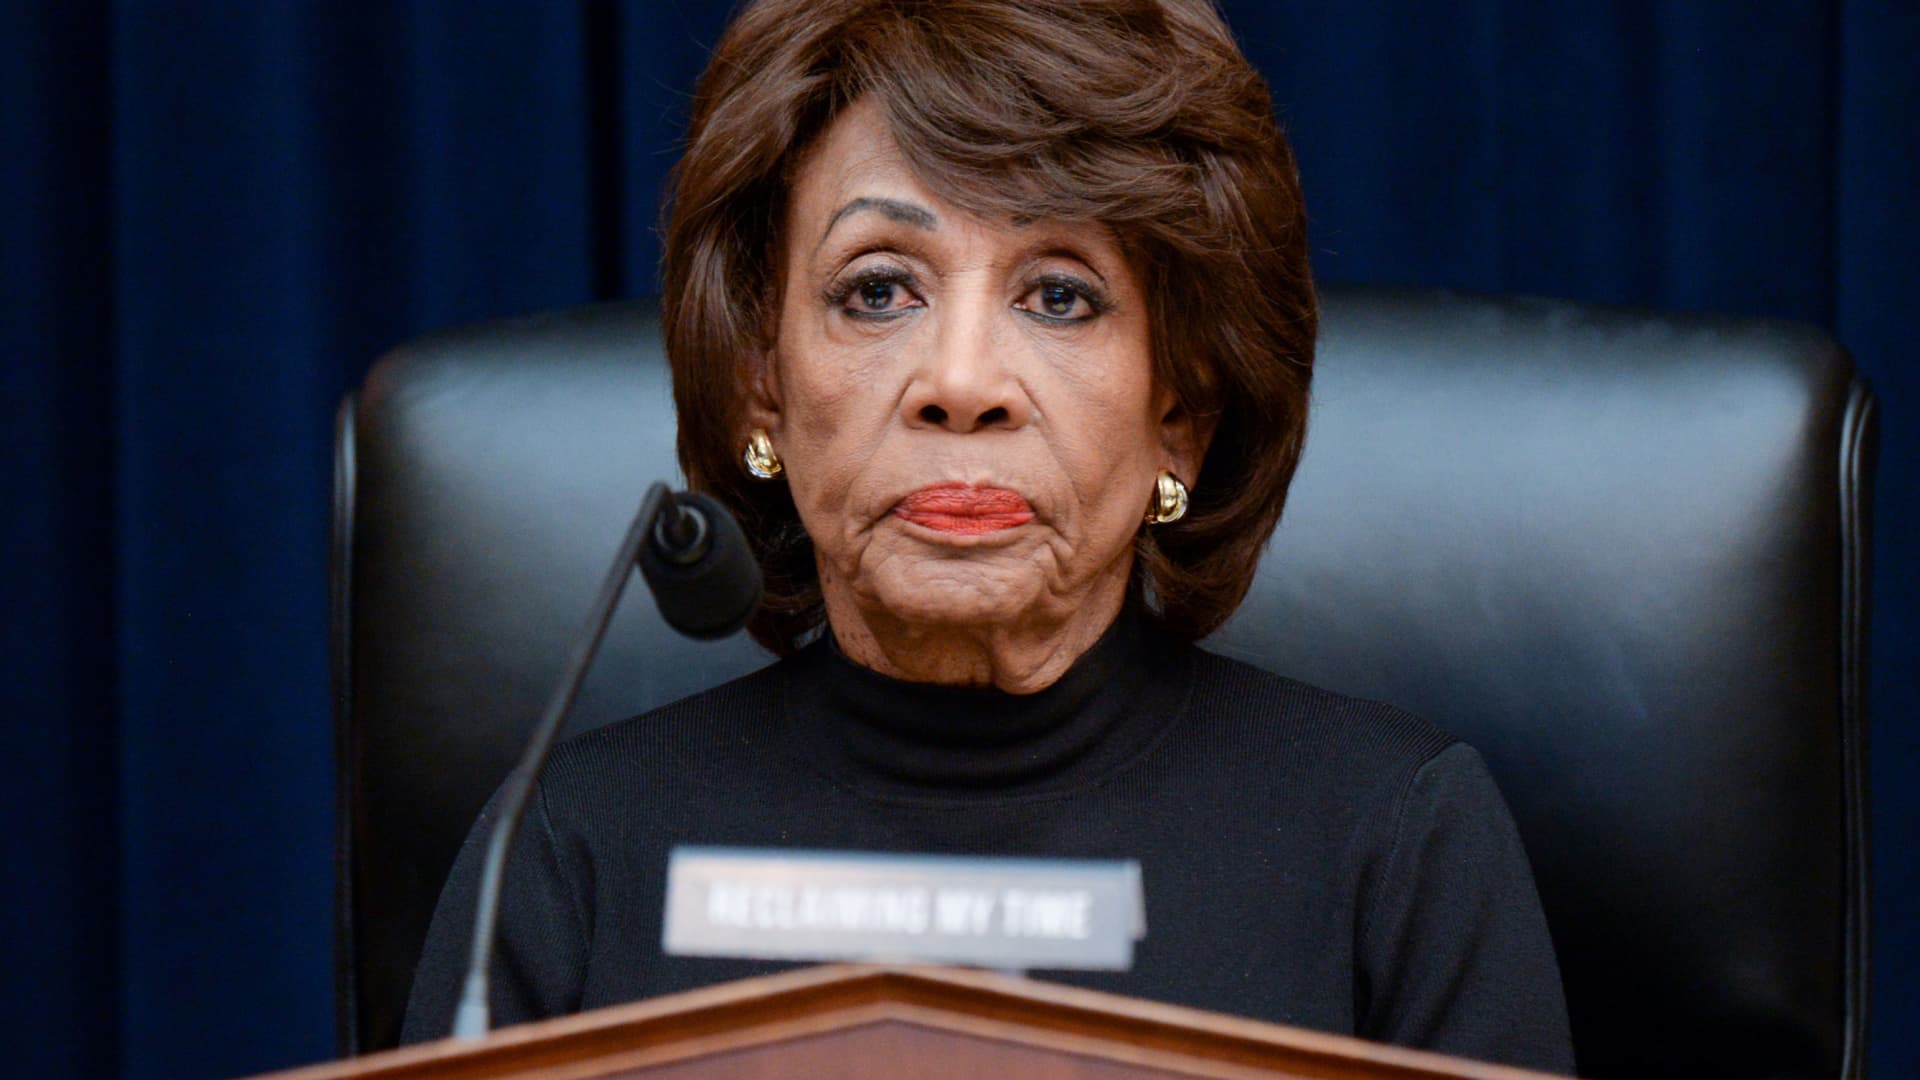 Maxine Waters doesn’t plan to subpoena Sam Bankman-Fried to testify at hearing on crypto exchange’s collapse